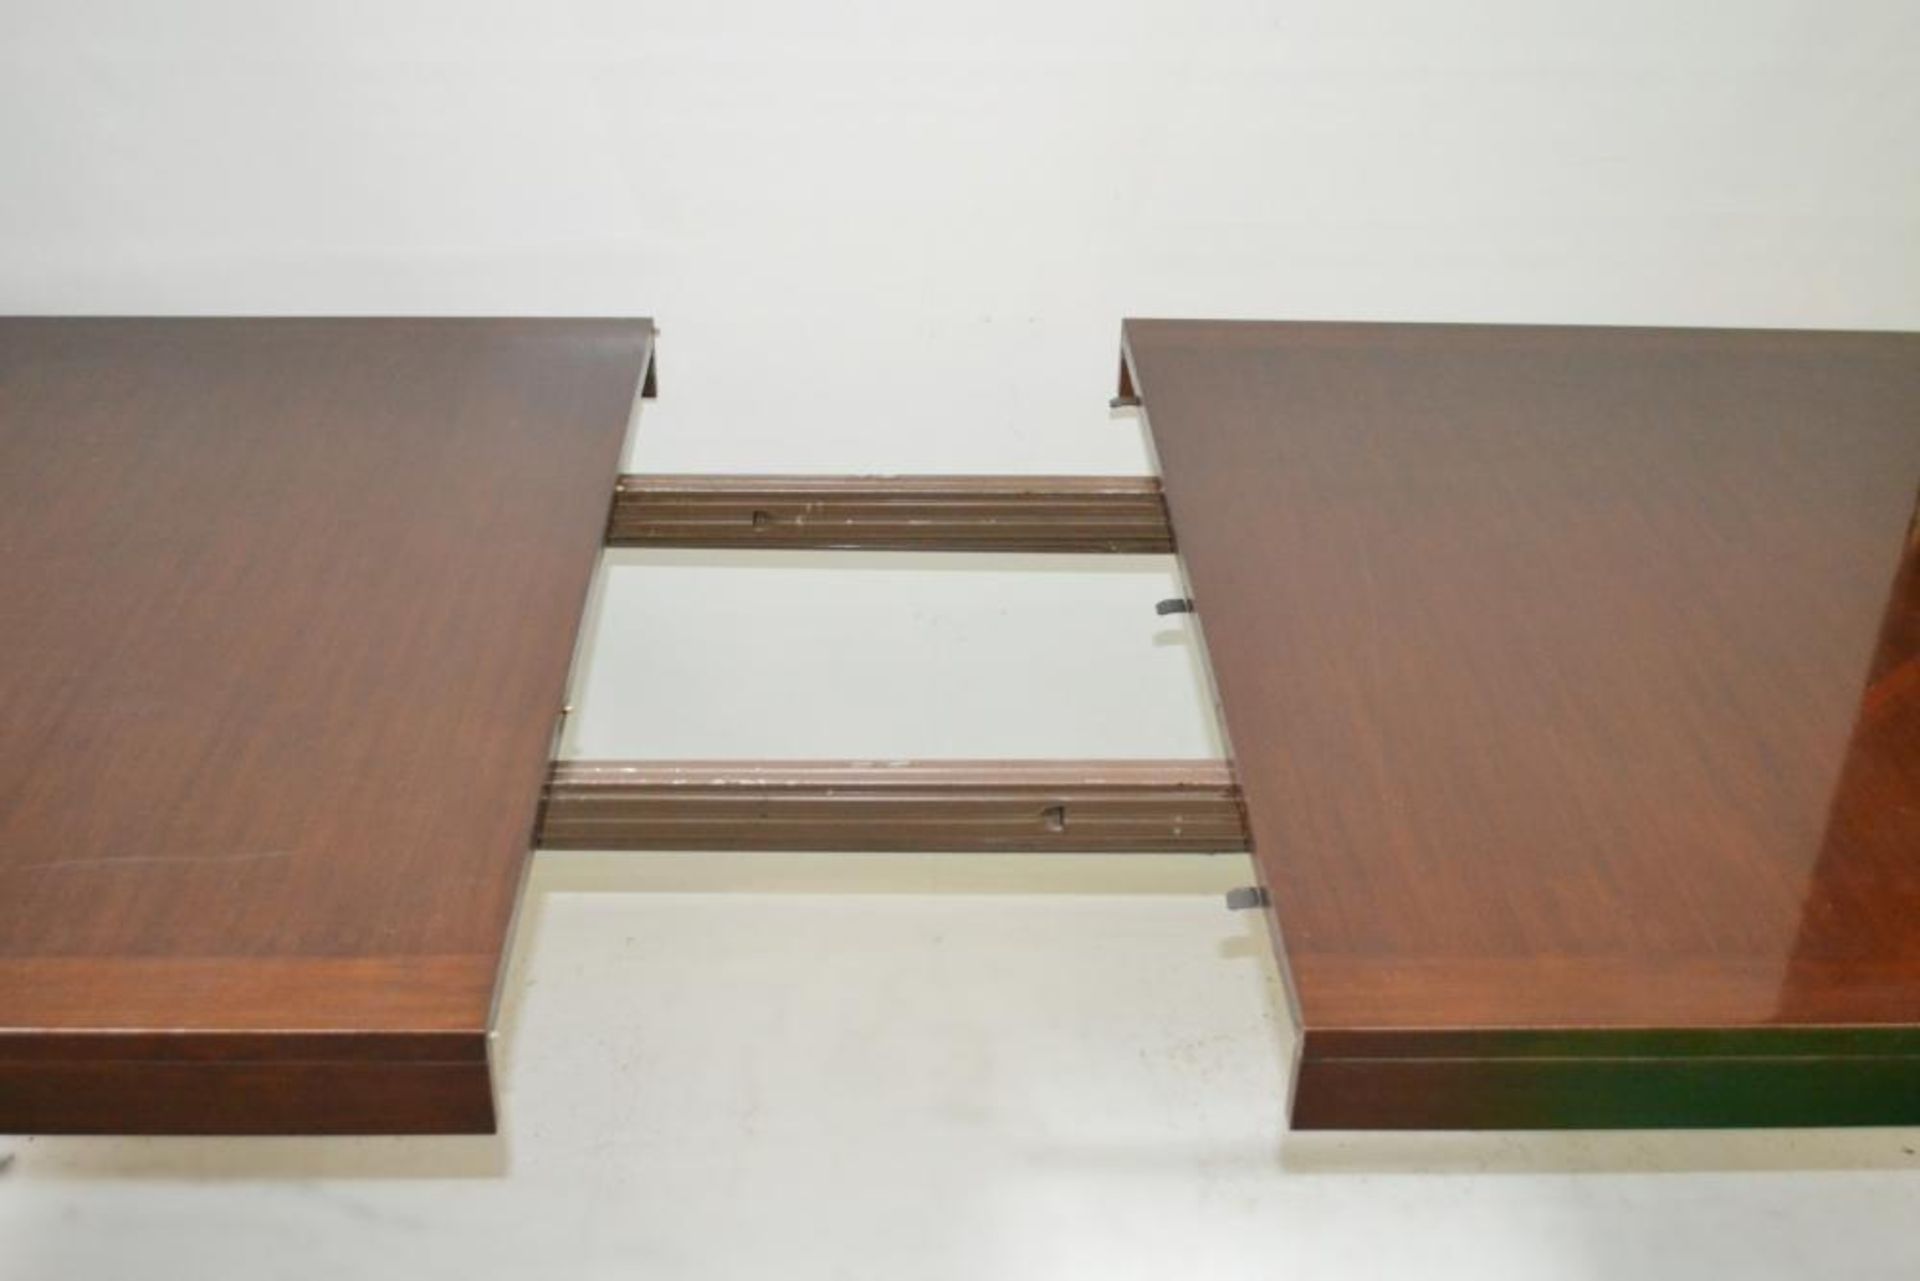 1 x BARBARA BARRY "Perfect Parsons" Dining Table In Dark Walnut&nbsp; - Includes Extensions Leaves - - Image 6 of 18